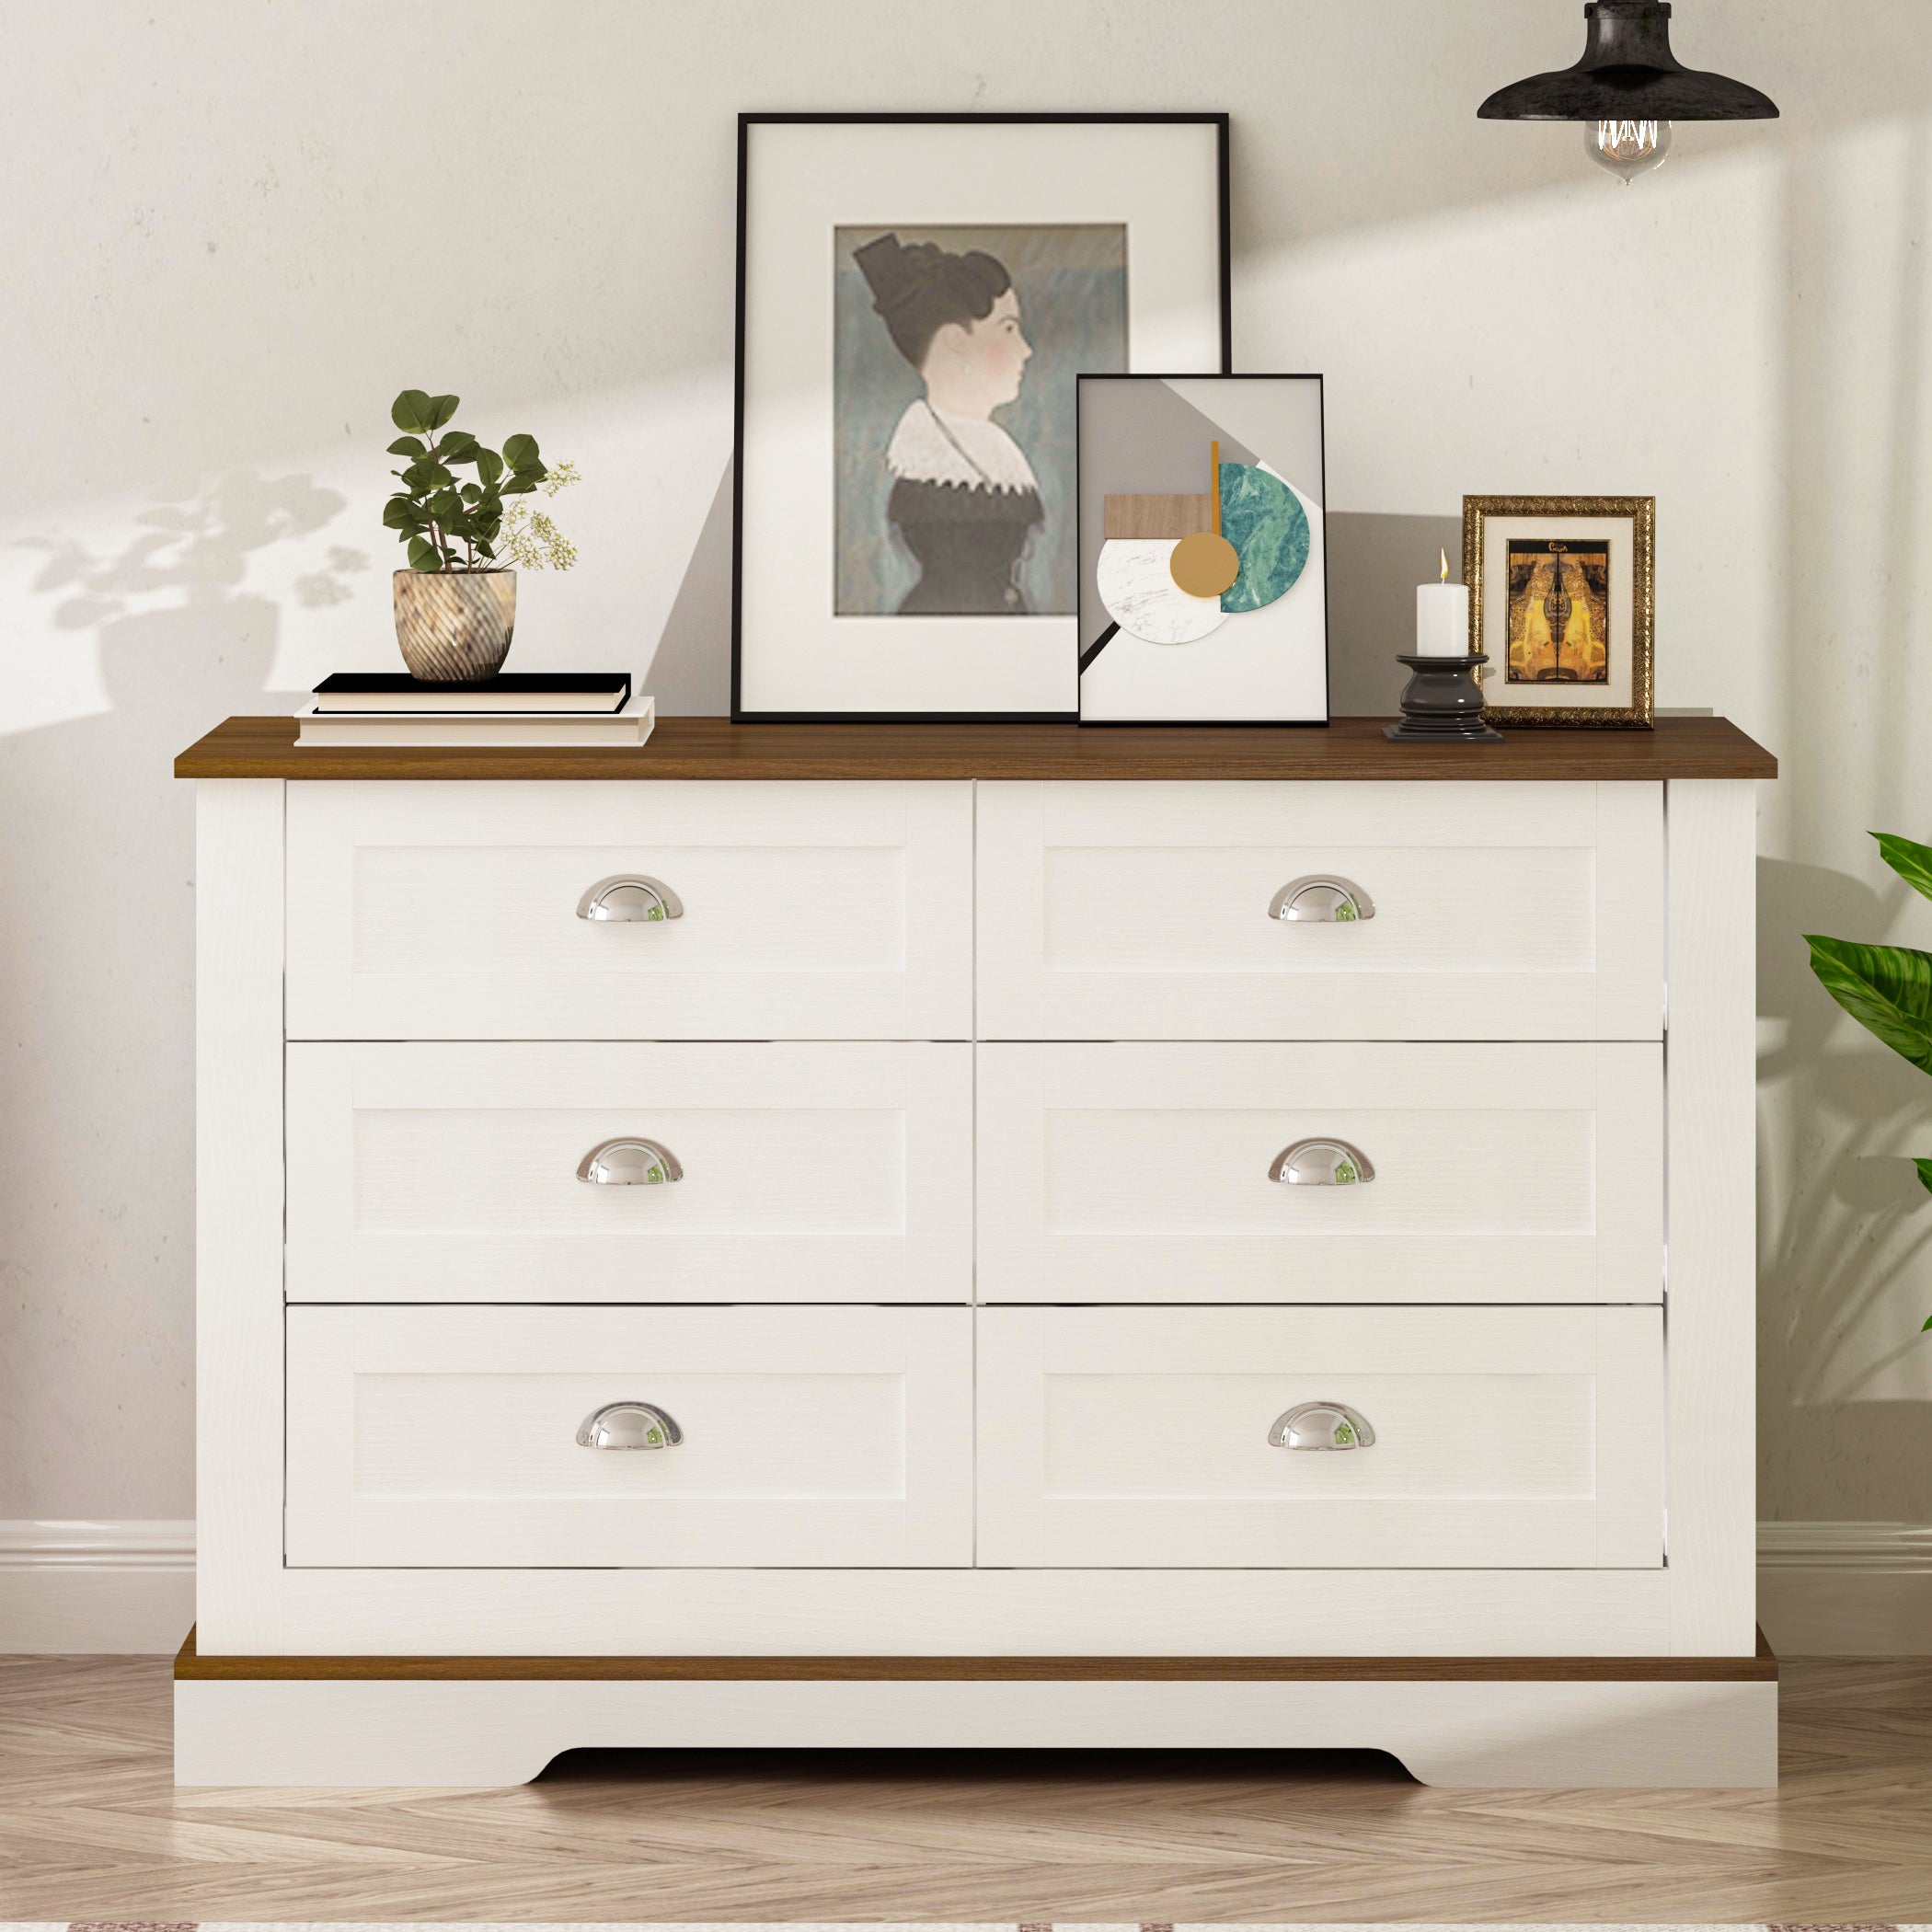 🆓🚛 Drawer Dresser Cabinet, Sideboard, Bar Cabinet, Buffet Server Console, Table Storage Cabinets, Metal Handle In The Shape of Silver Shell, White + Brown